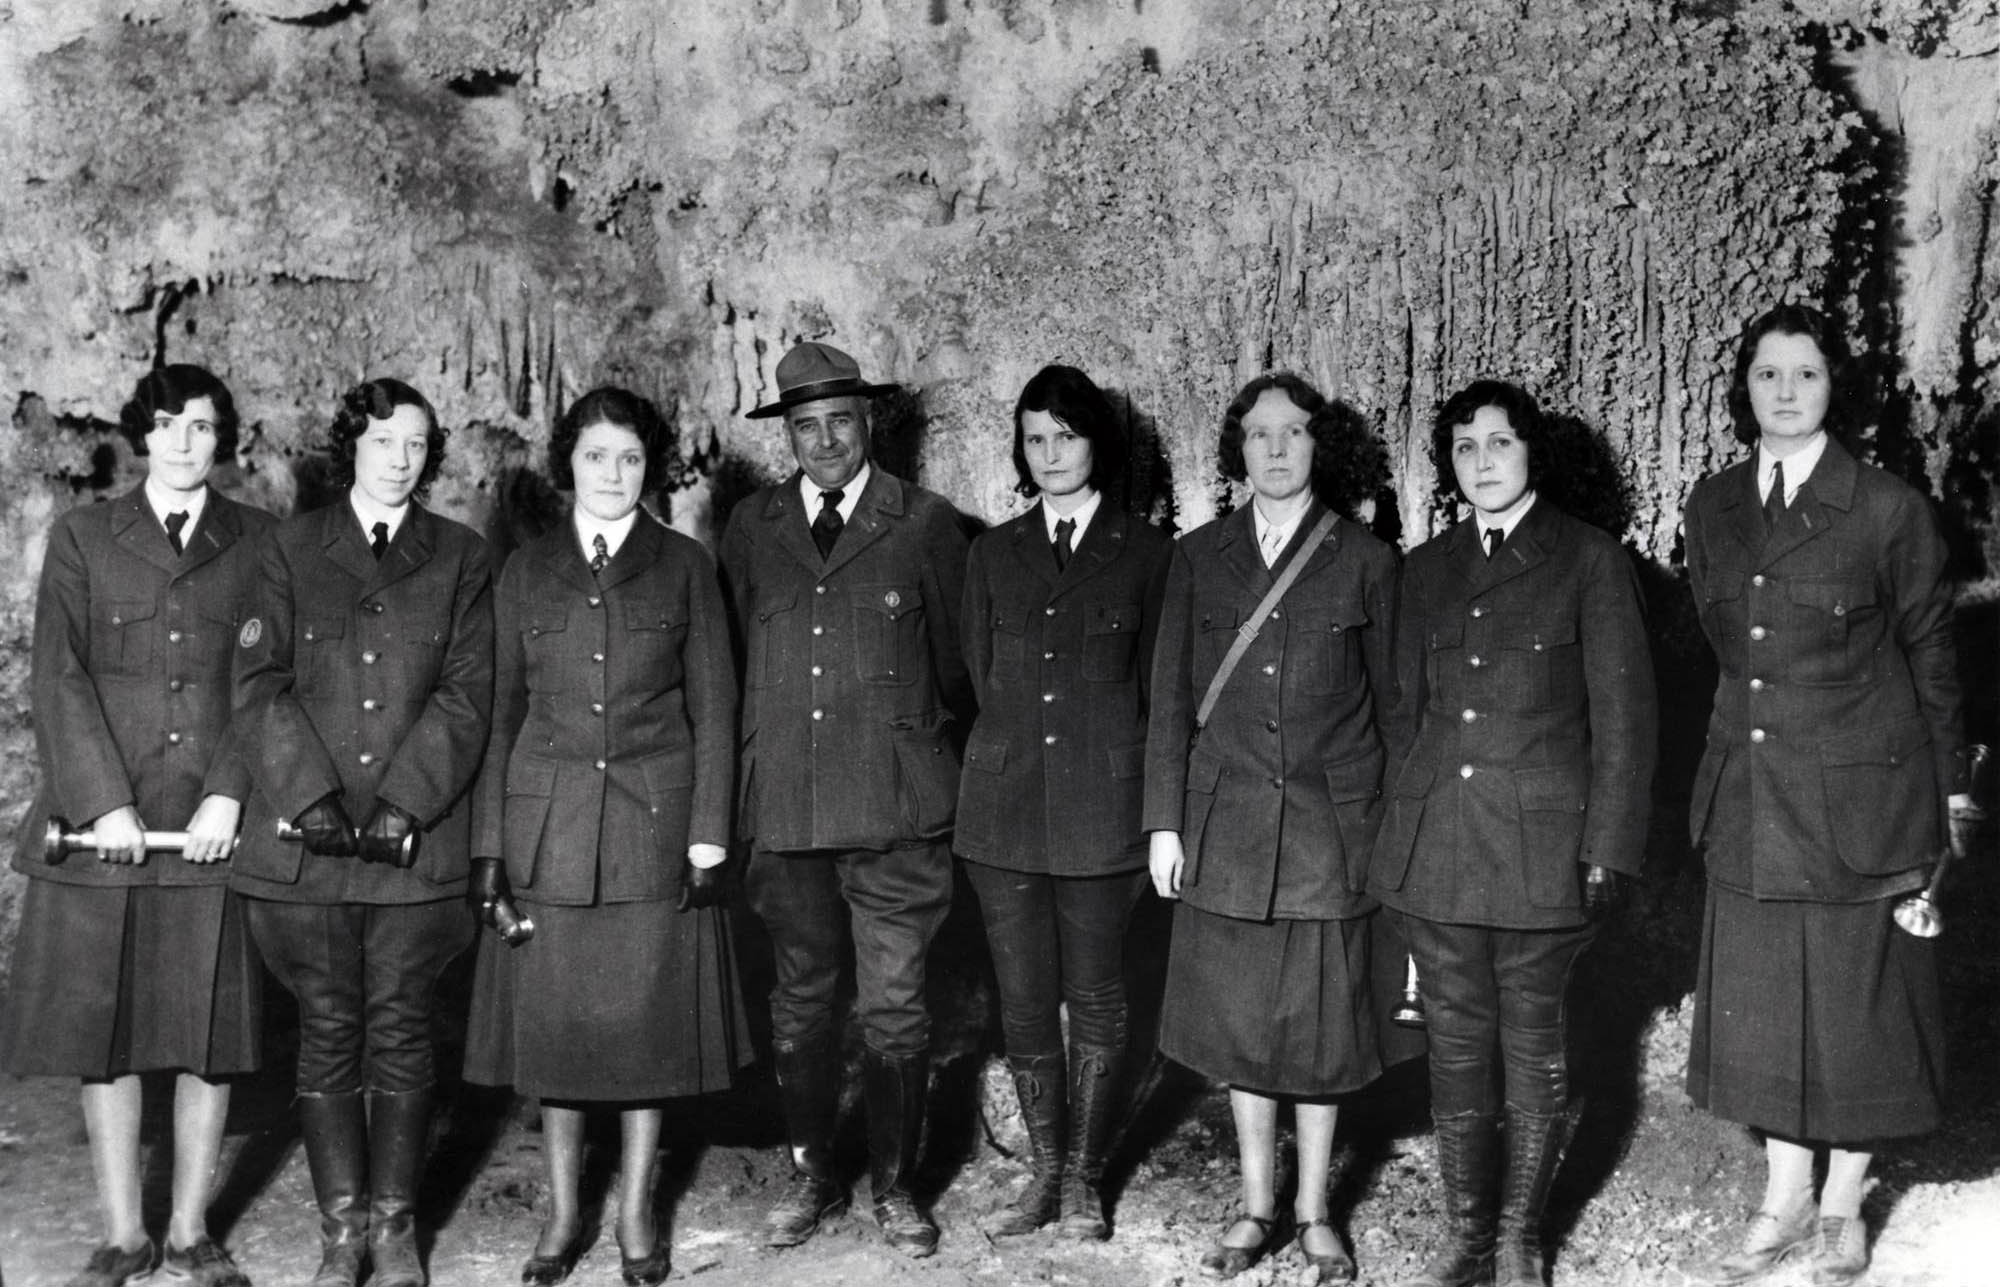 Seven women pose with Thomas Boles inside a cave. They all wear NPS uniforms. Only Boles wears a broad brim hat and a round superintendent’s badge.